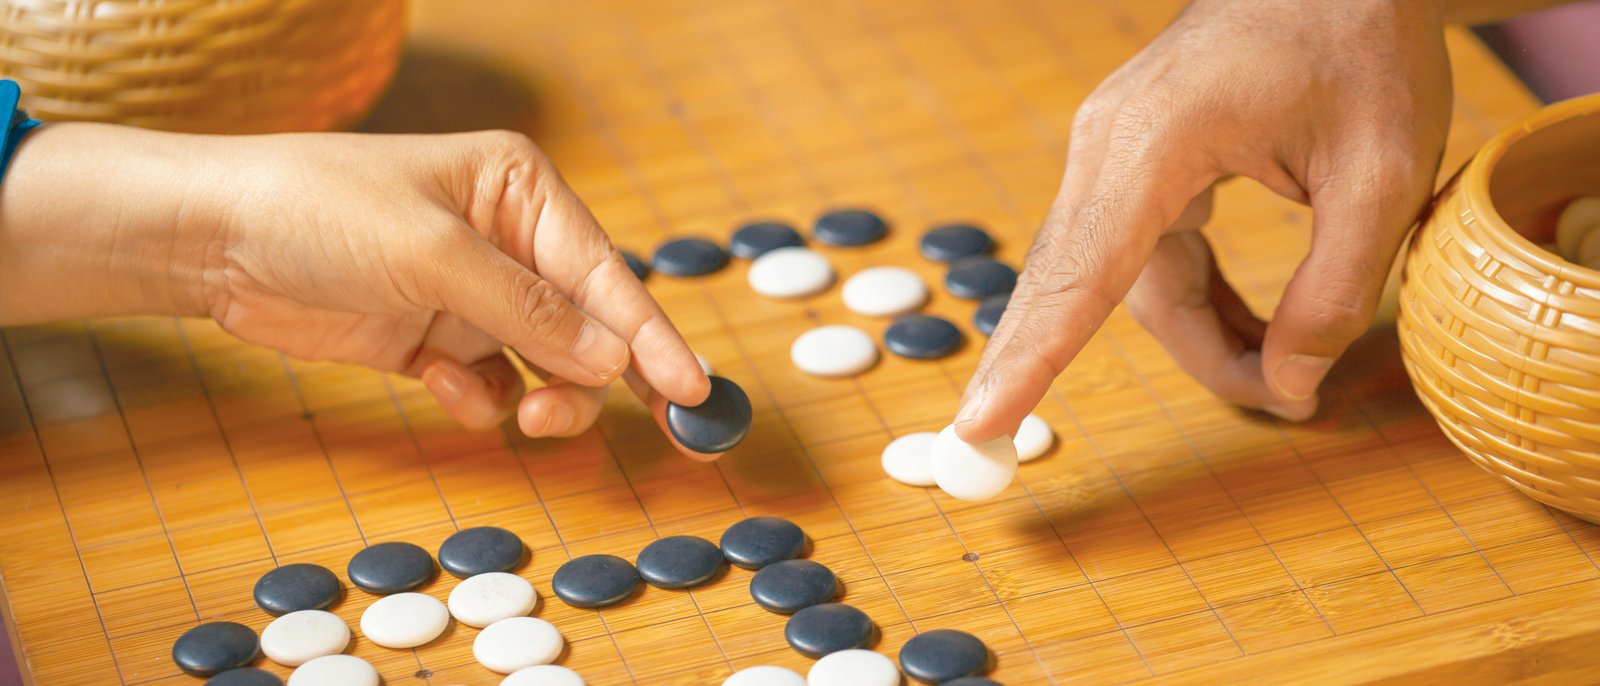 Go board game playing. A competitor is placing a marble piece on a Go board game